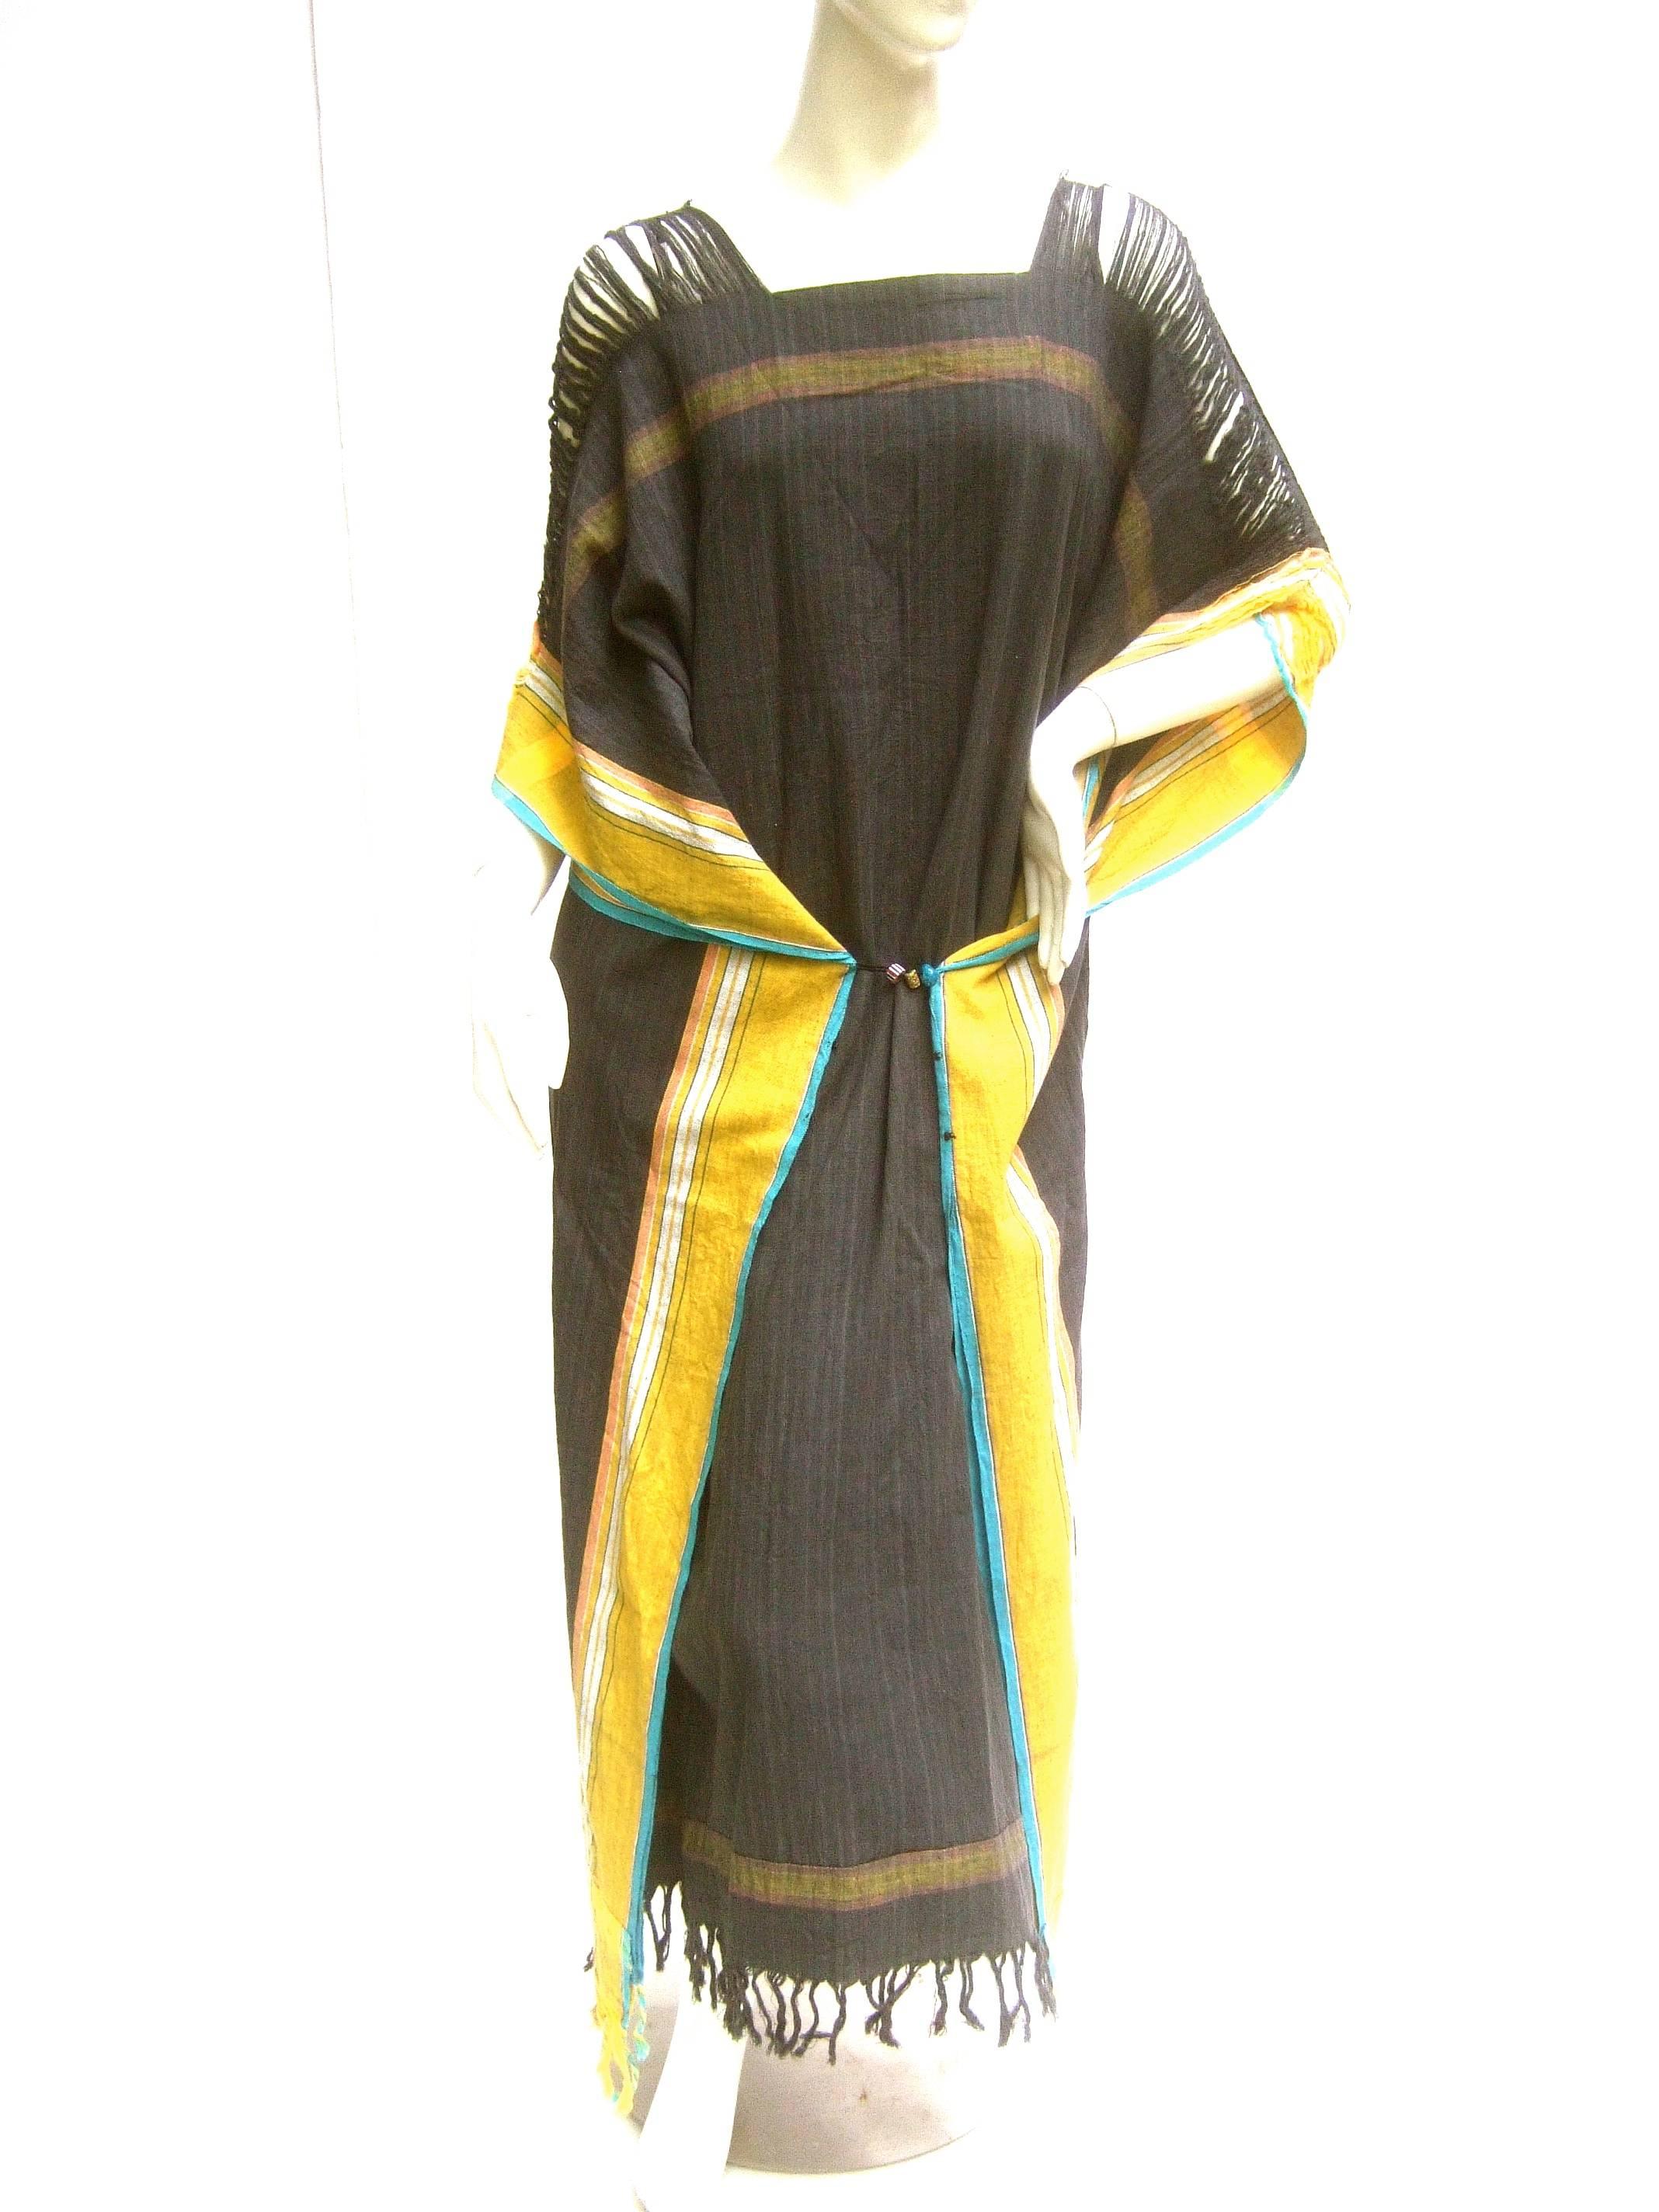 South African 1970s cotton ethnic caftan 
The handmade boho style caftan is designed
with shredded shoulders that partially
reveal the skin underneath 

The gray fabric has subtle vertical thin stripes
The sides are accented with bold golden